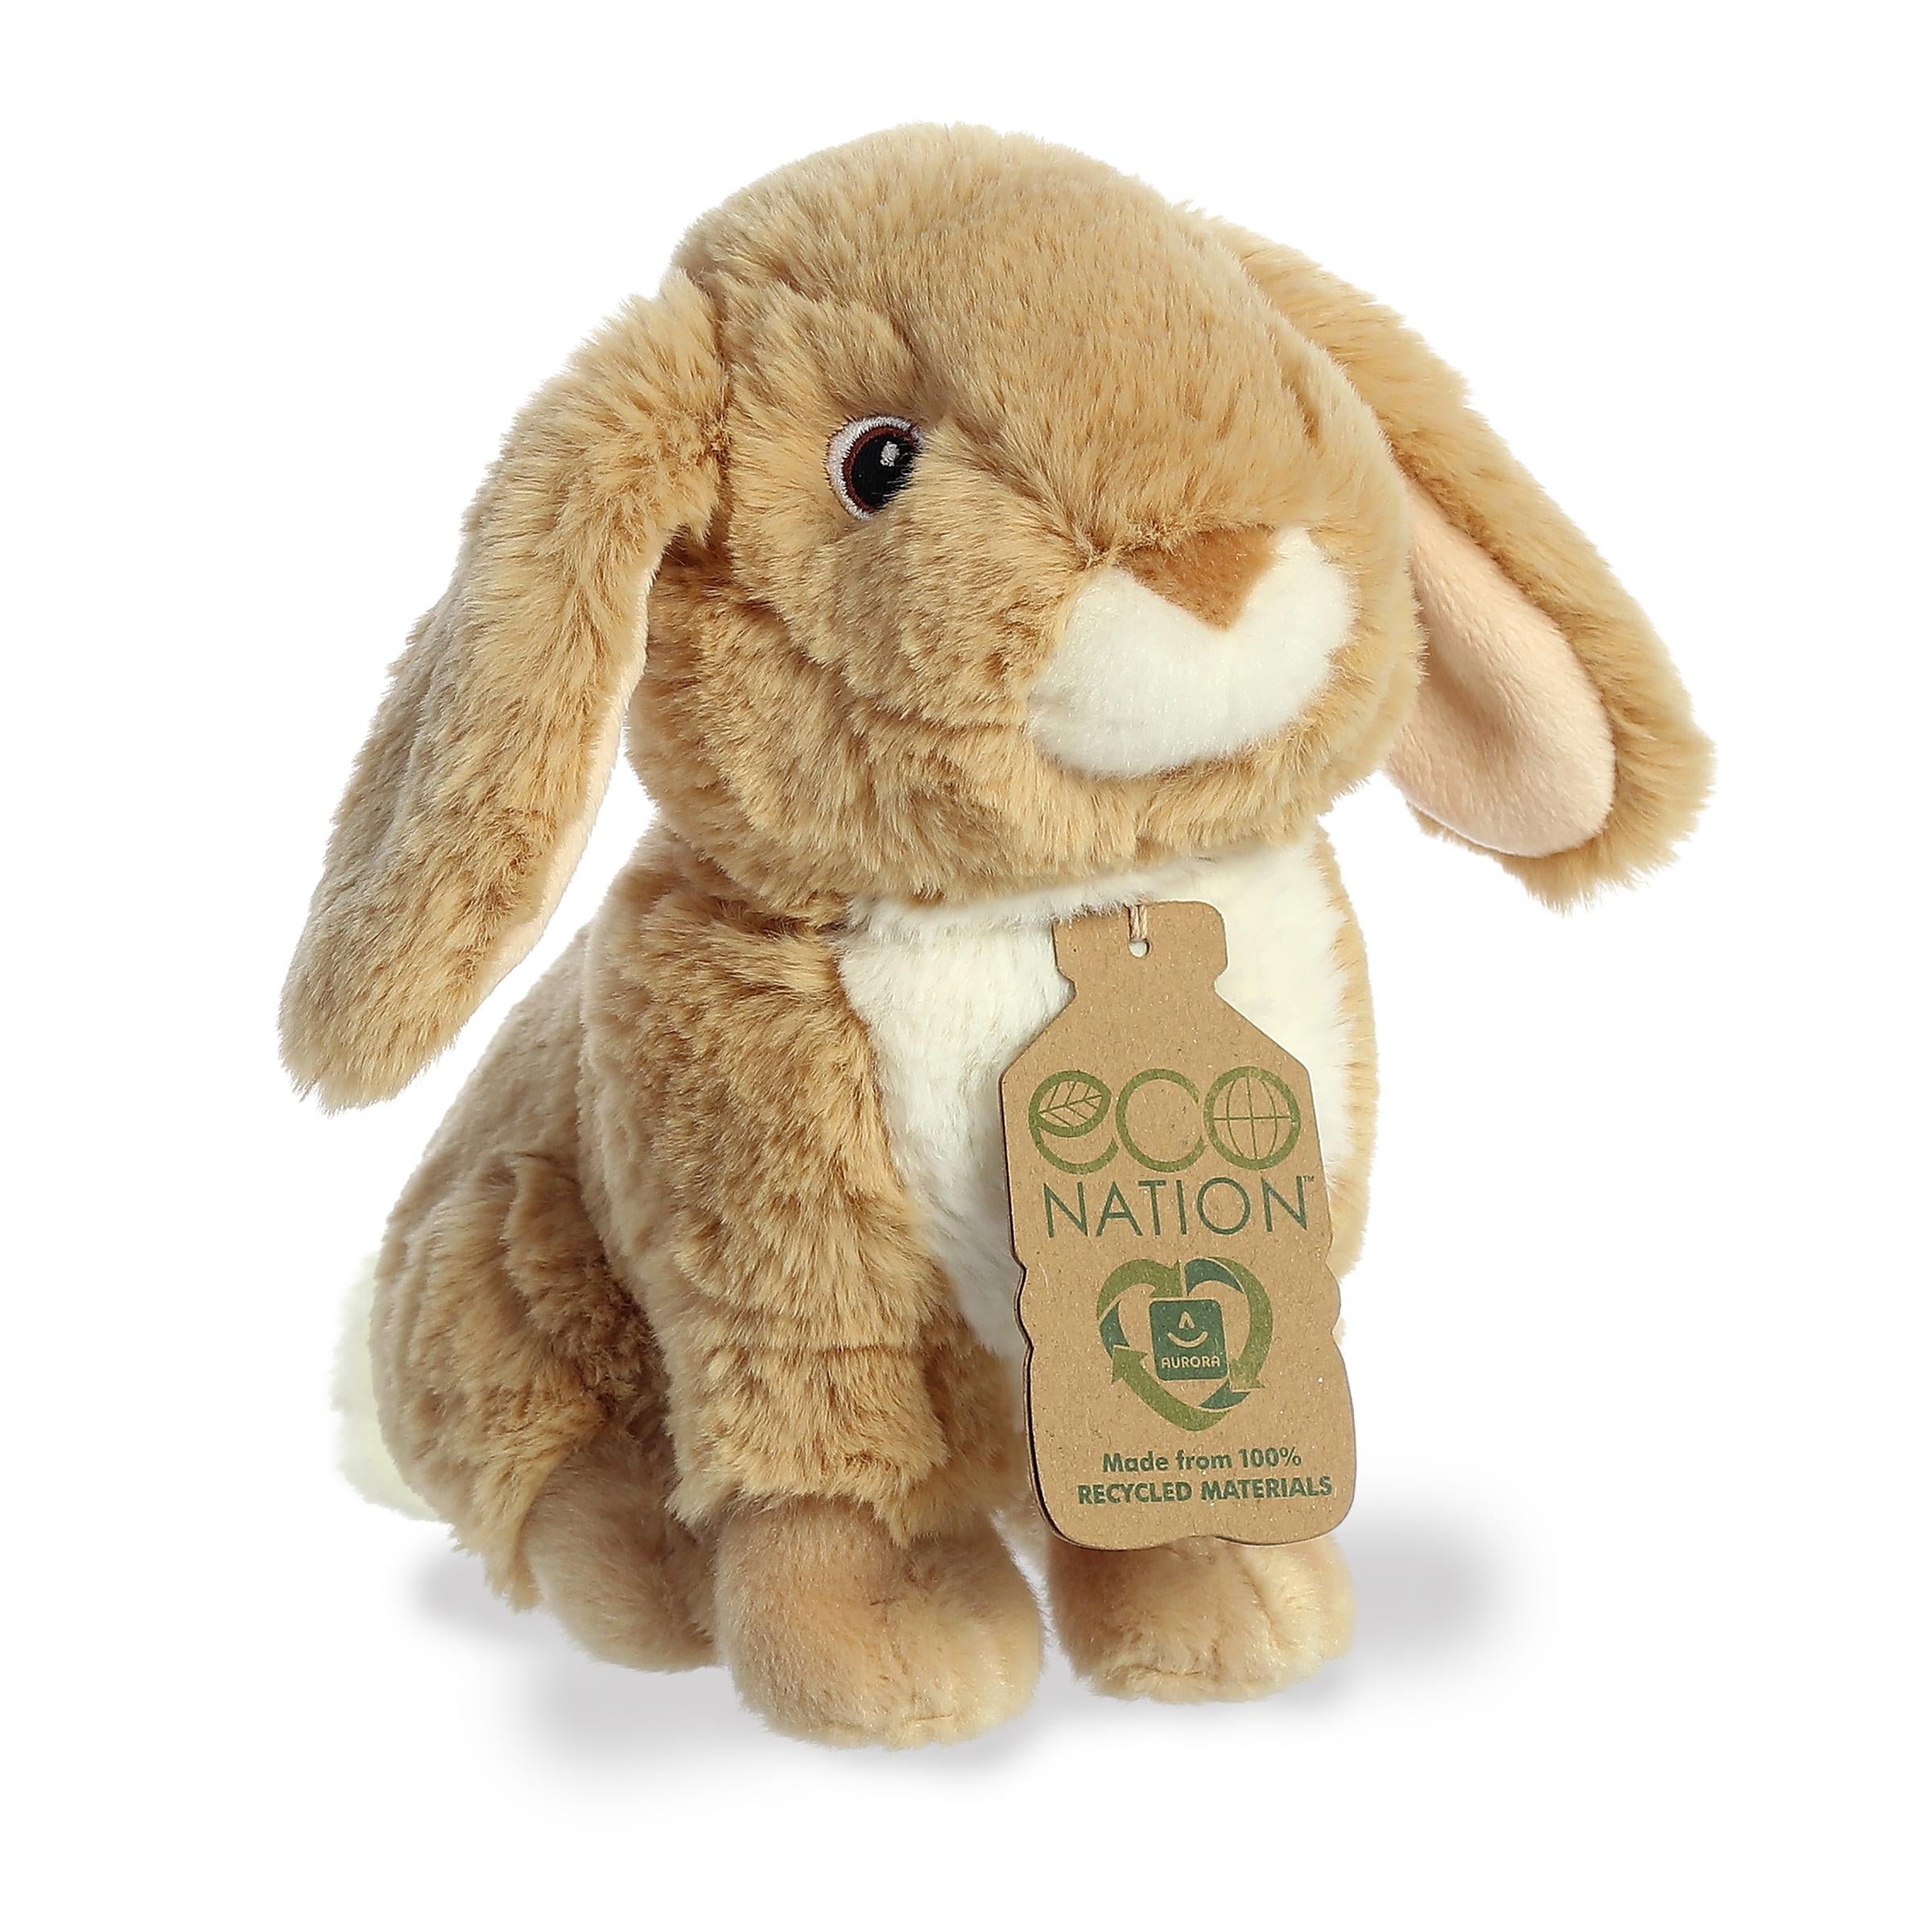 A lovely rabbit plush with tan fur and long ears, sweet embroidered eyes, and an eco-nation tag by its fluffy neck